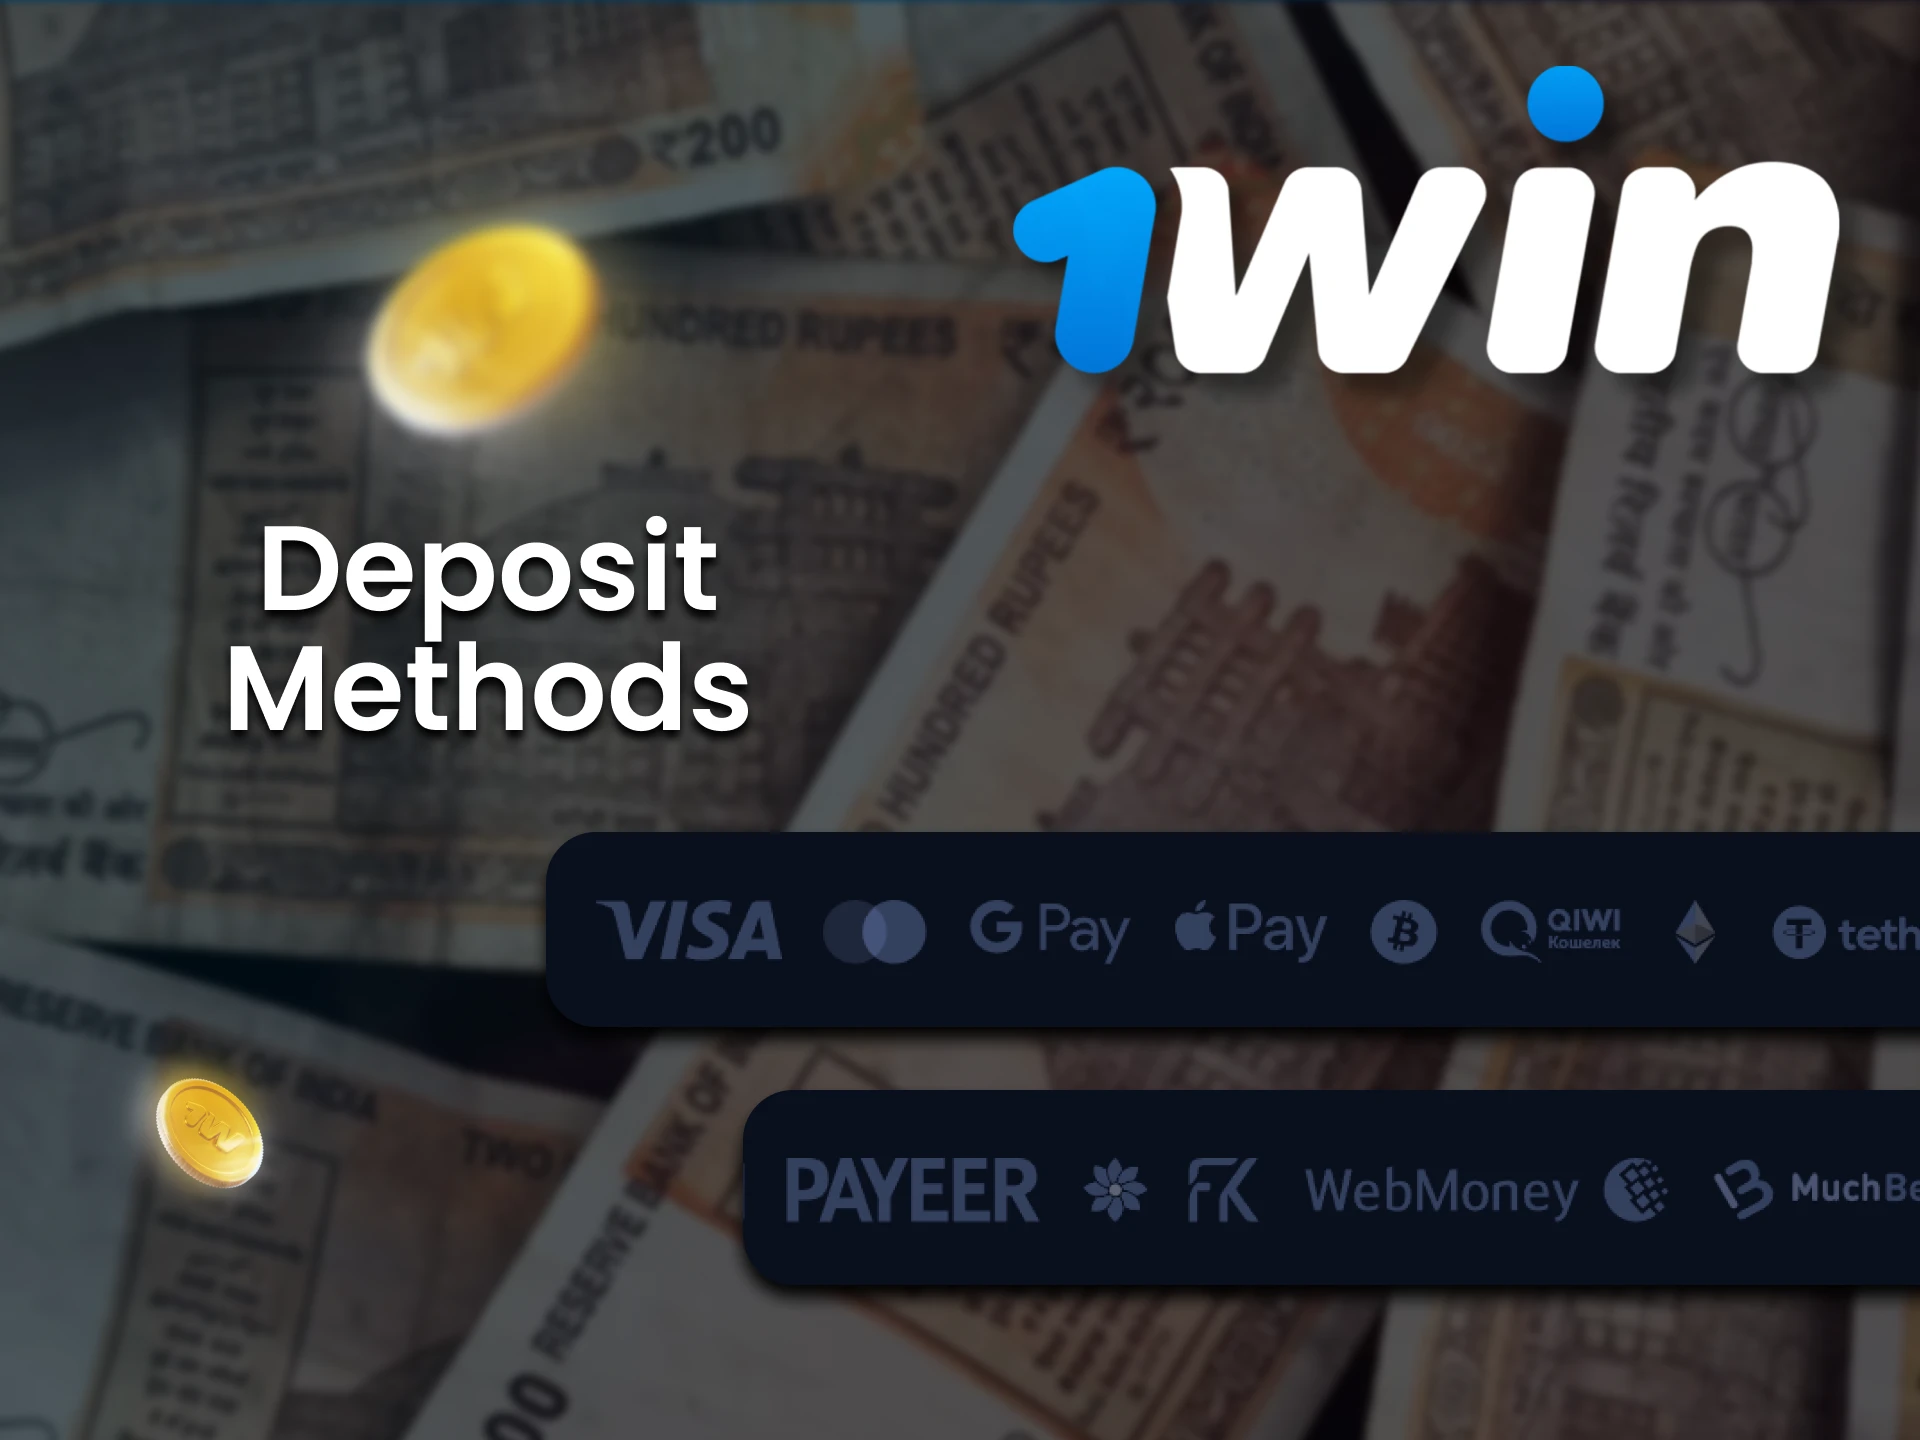 We’ll tell you about deposit methods on the 1win website.